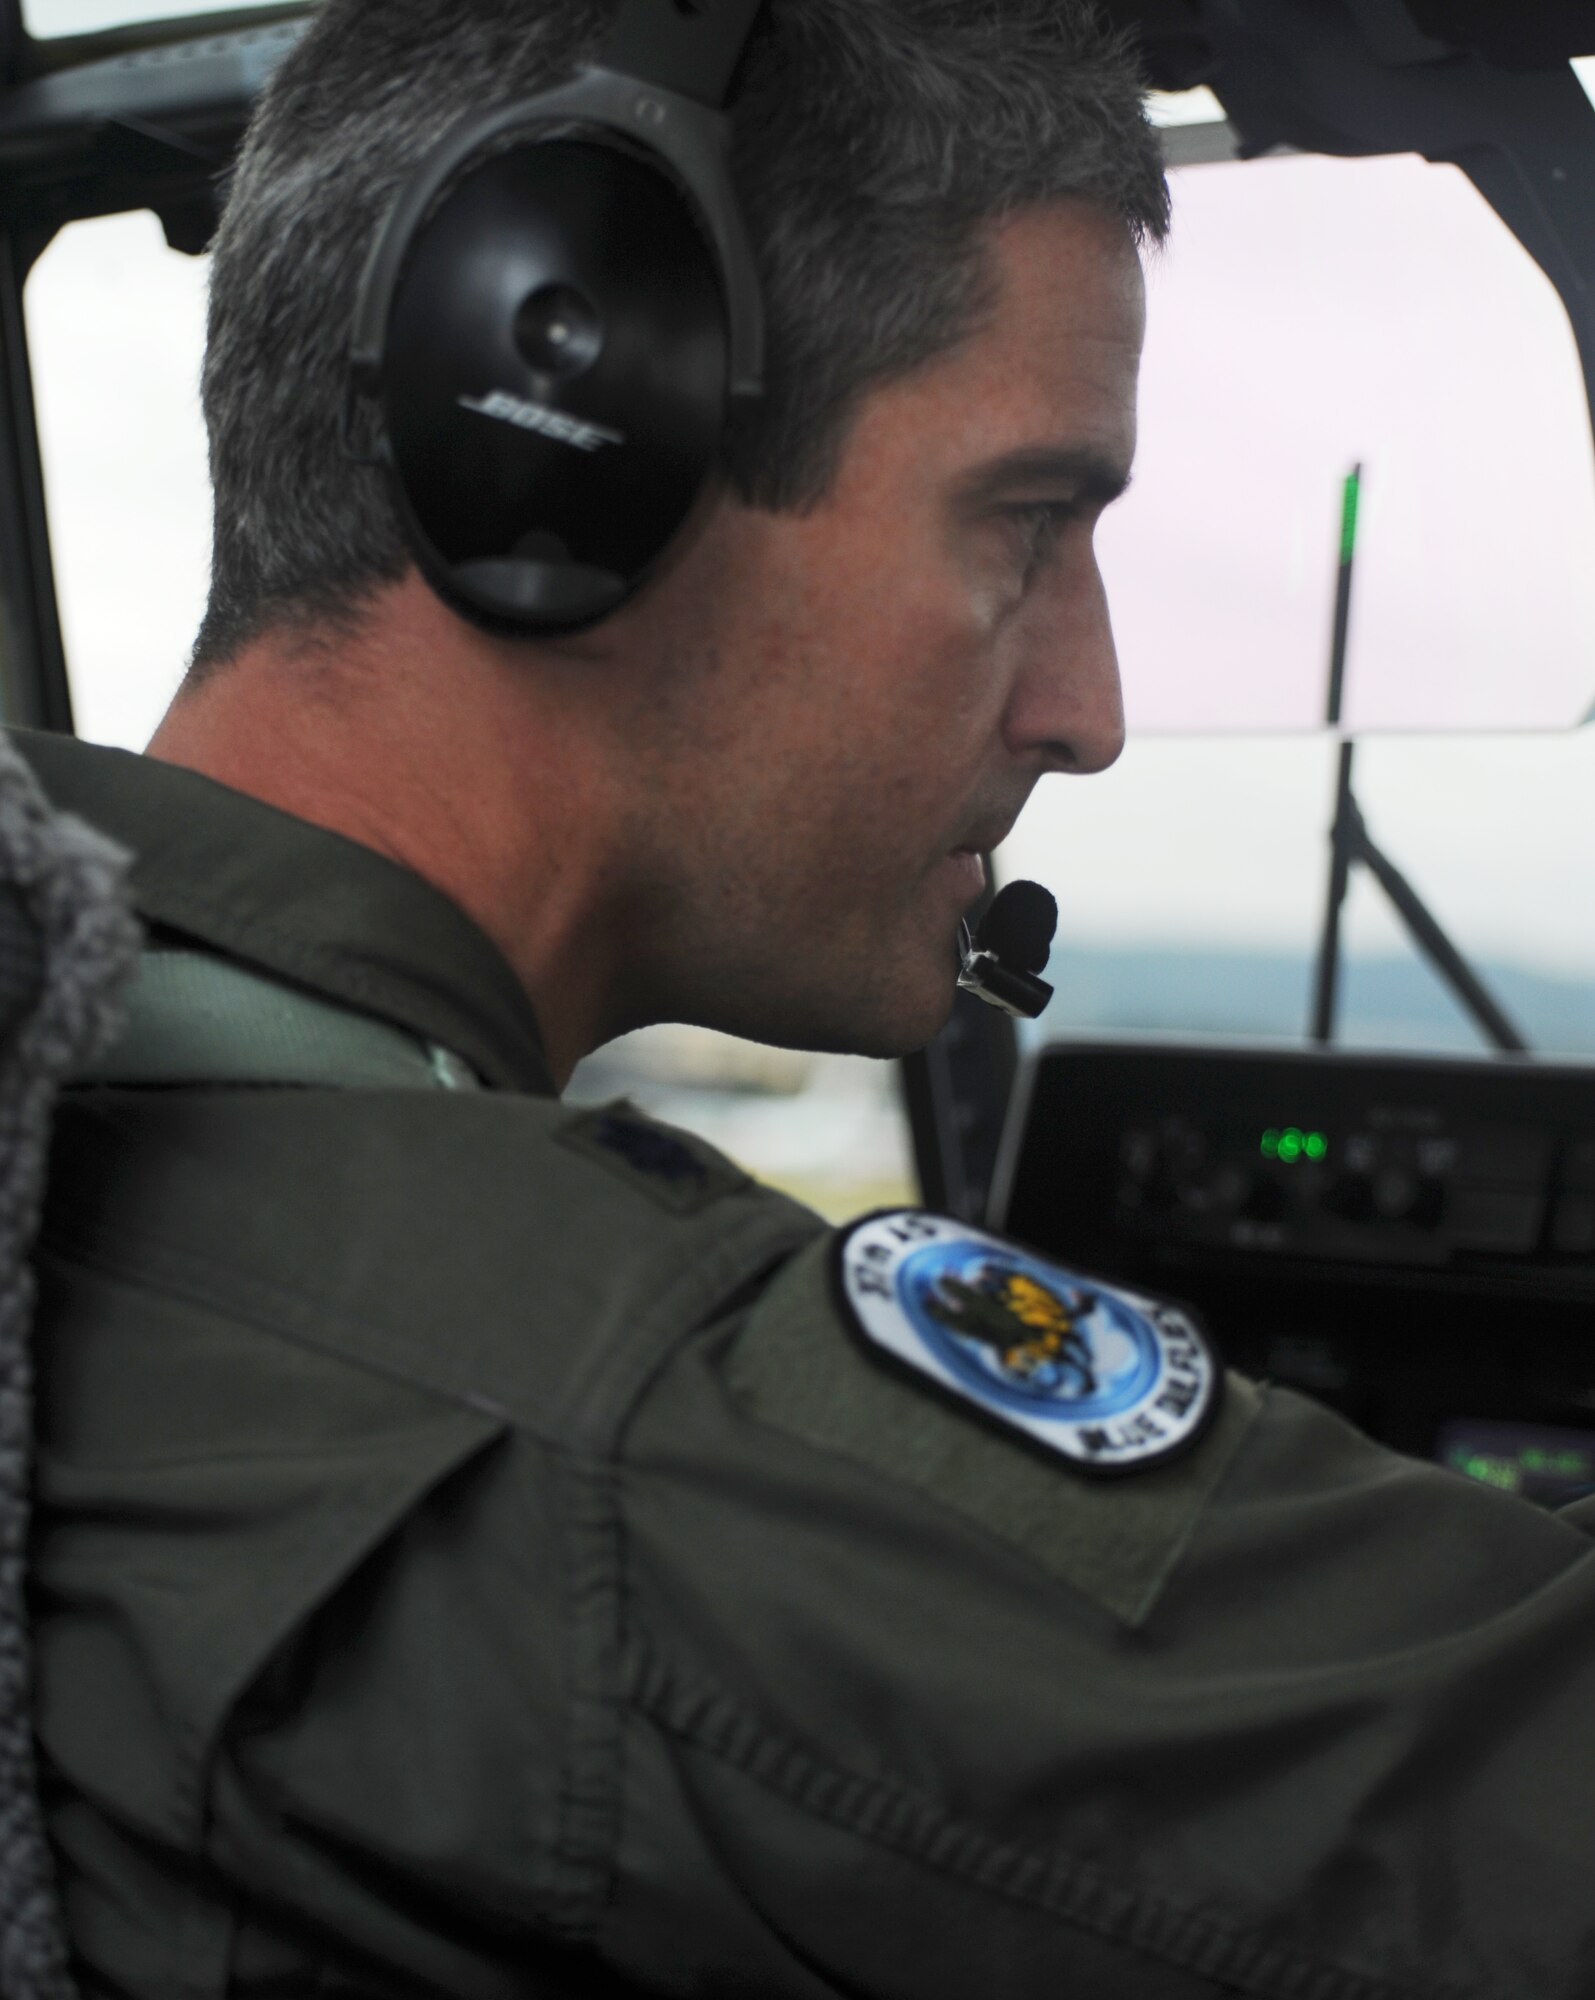 Lt. Col. Tobias Sernel, 37th Airlift Squadron commander, adjust flight controls in the cockpit of a C-130J as he prepares to take off from Trondheim Airport, Norway,  to deliver firefighting and humanitarian supplies to Moscow Aug. 14, 2010. The supplies are being delivered to Moscow after an official request from the Russian government to the U.S. and at the request of the Department of State. The Department of Defense directed U.S. European Command to provide valuable firefighting equipment that includes firefighting protective equipment and tools to help Russia combat the ongoing wildfires. (US Army photo by Staff Sgt. Lawree R Washington Jr)